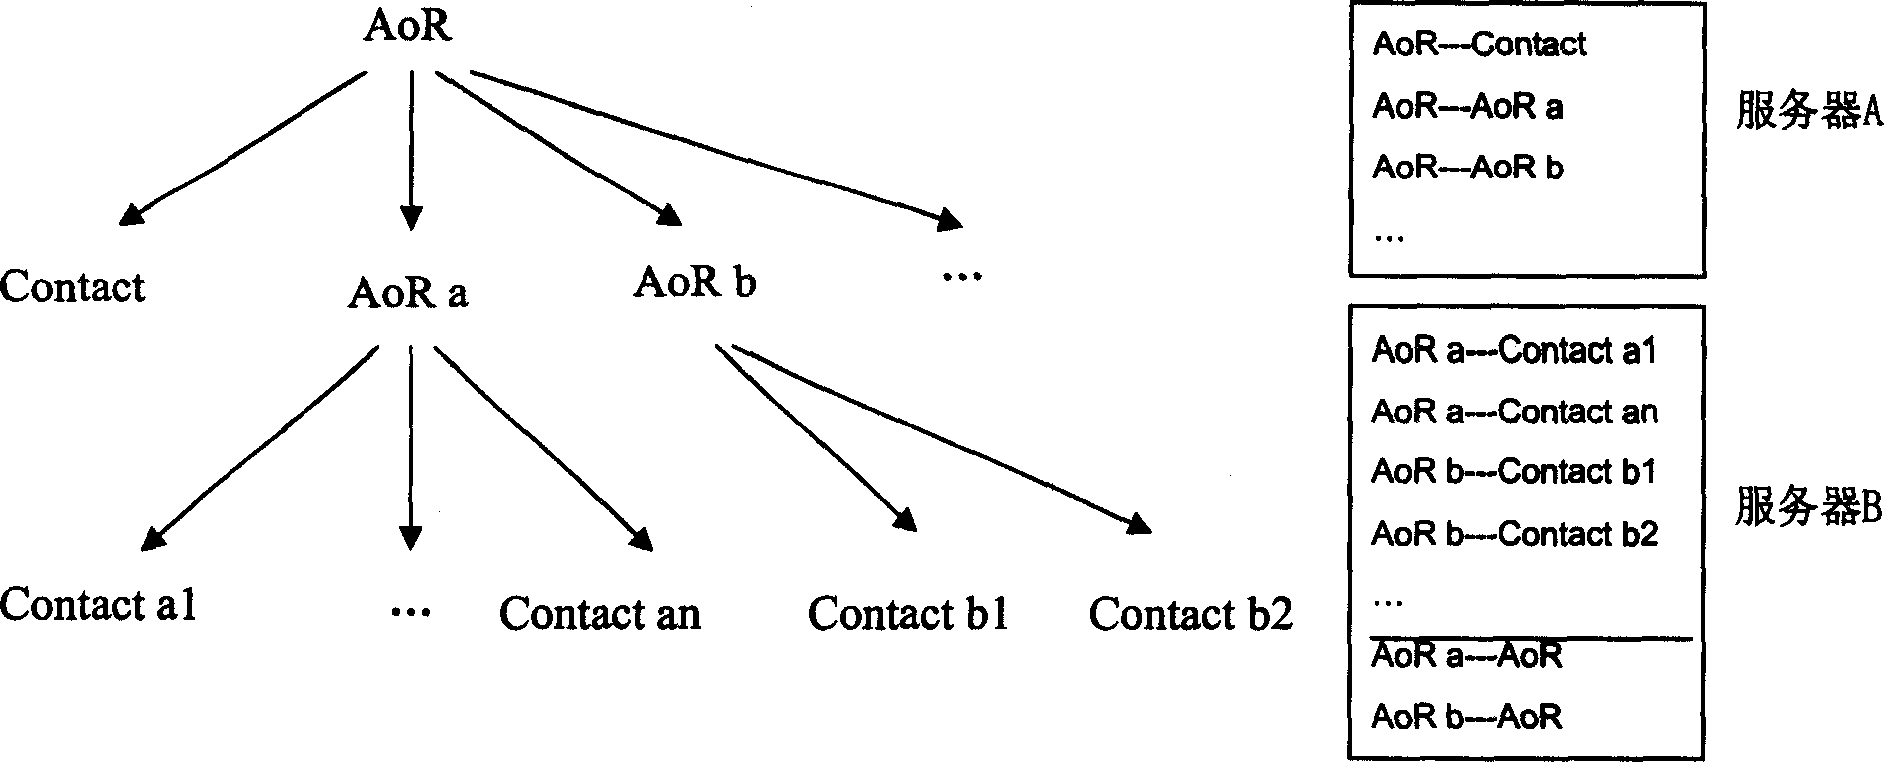 Method for putting user mark structure in communication network